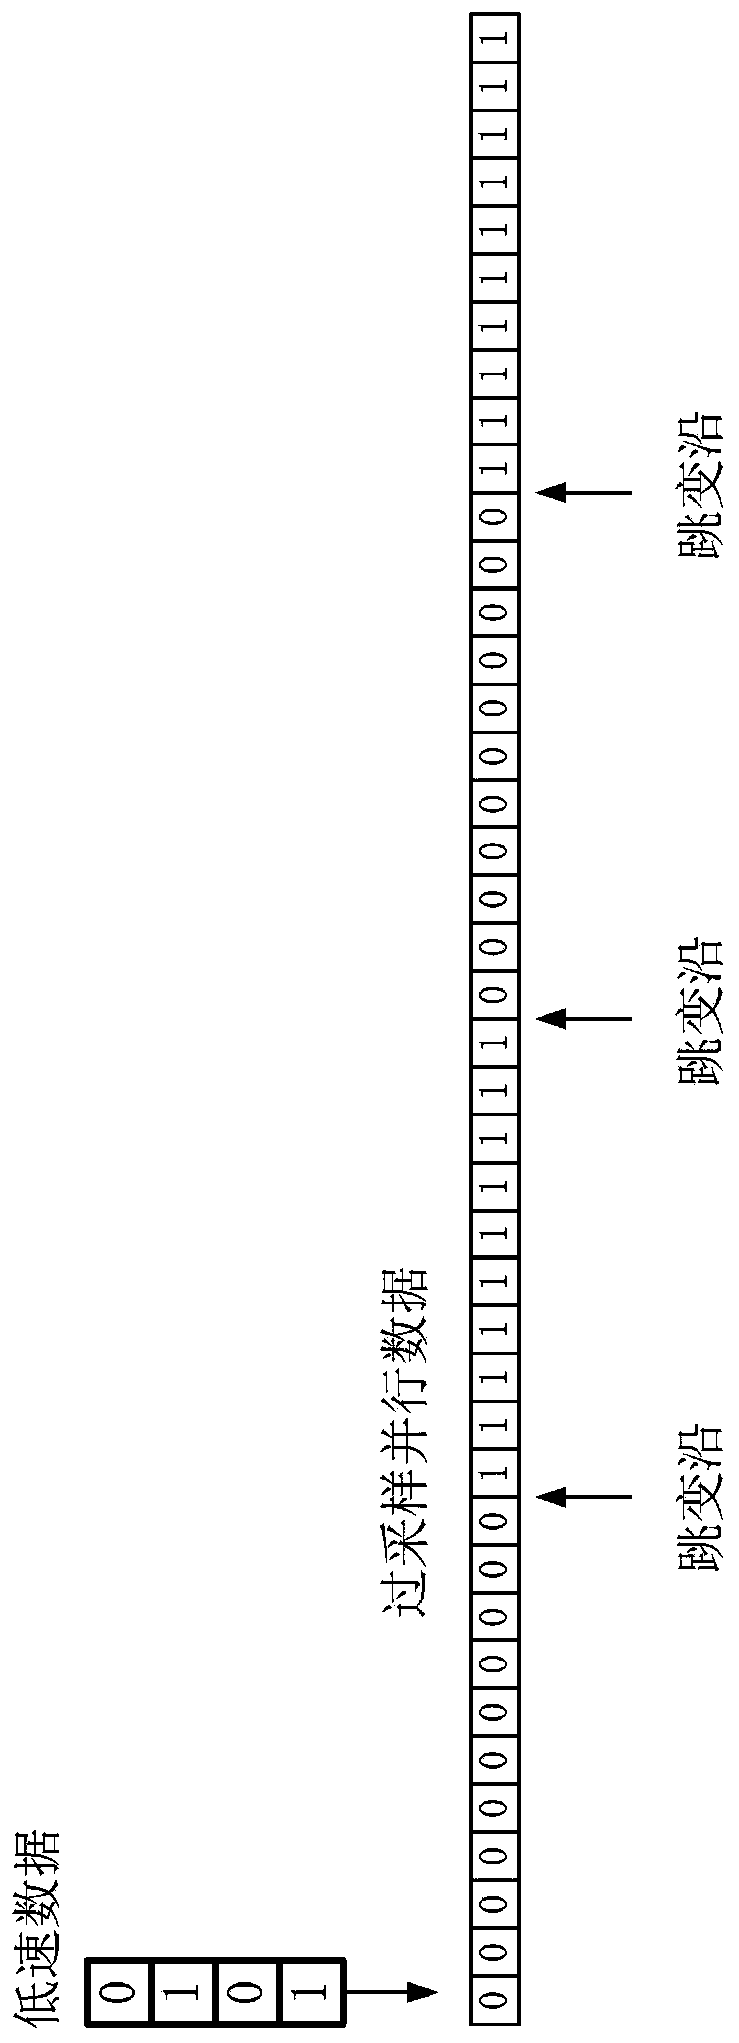 Method and system for recovering low-speed data through high-speed serdes interface